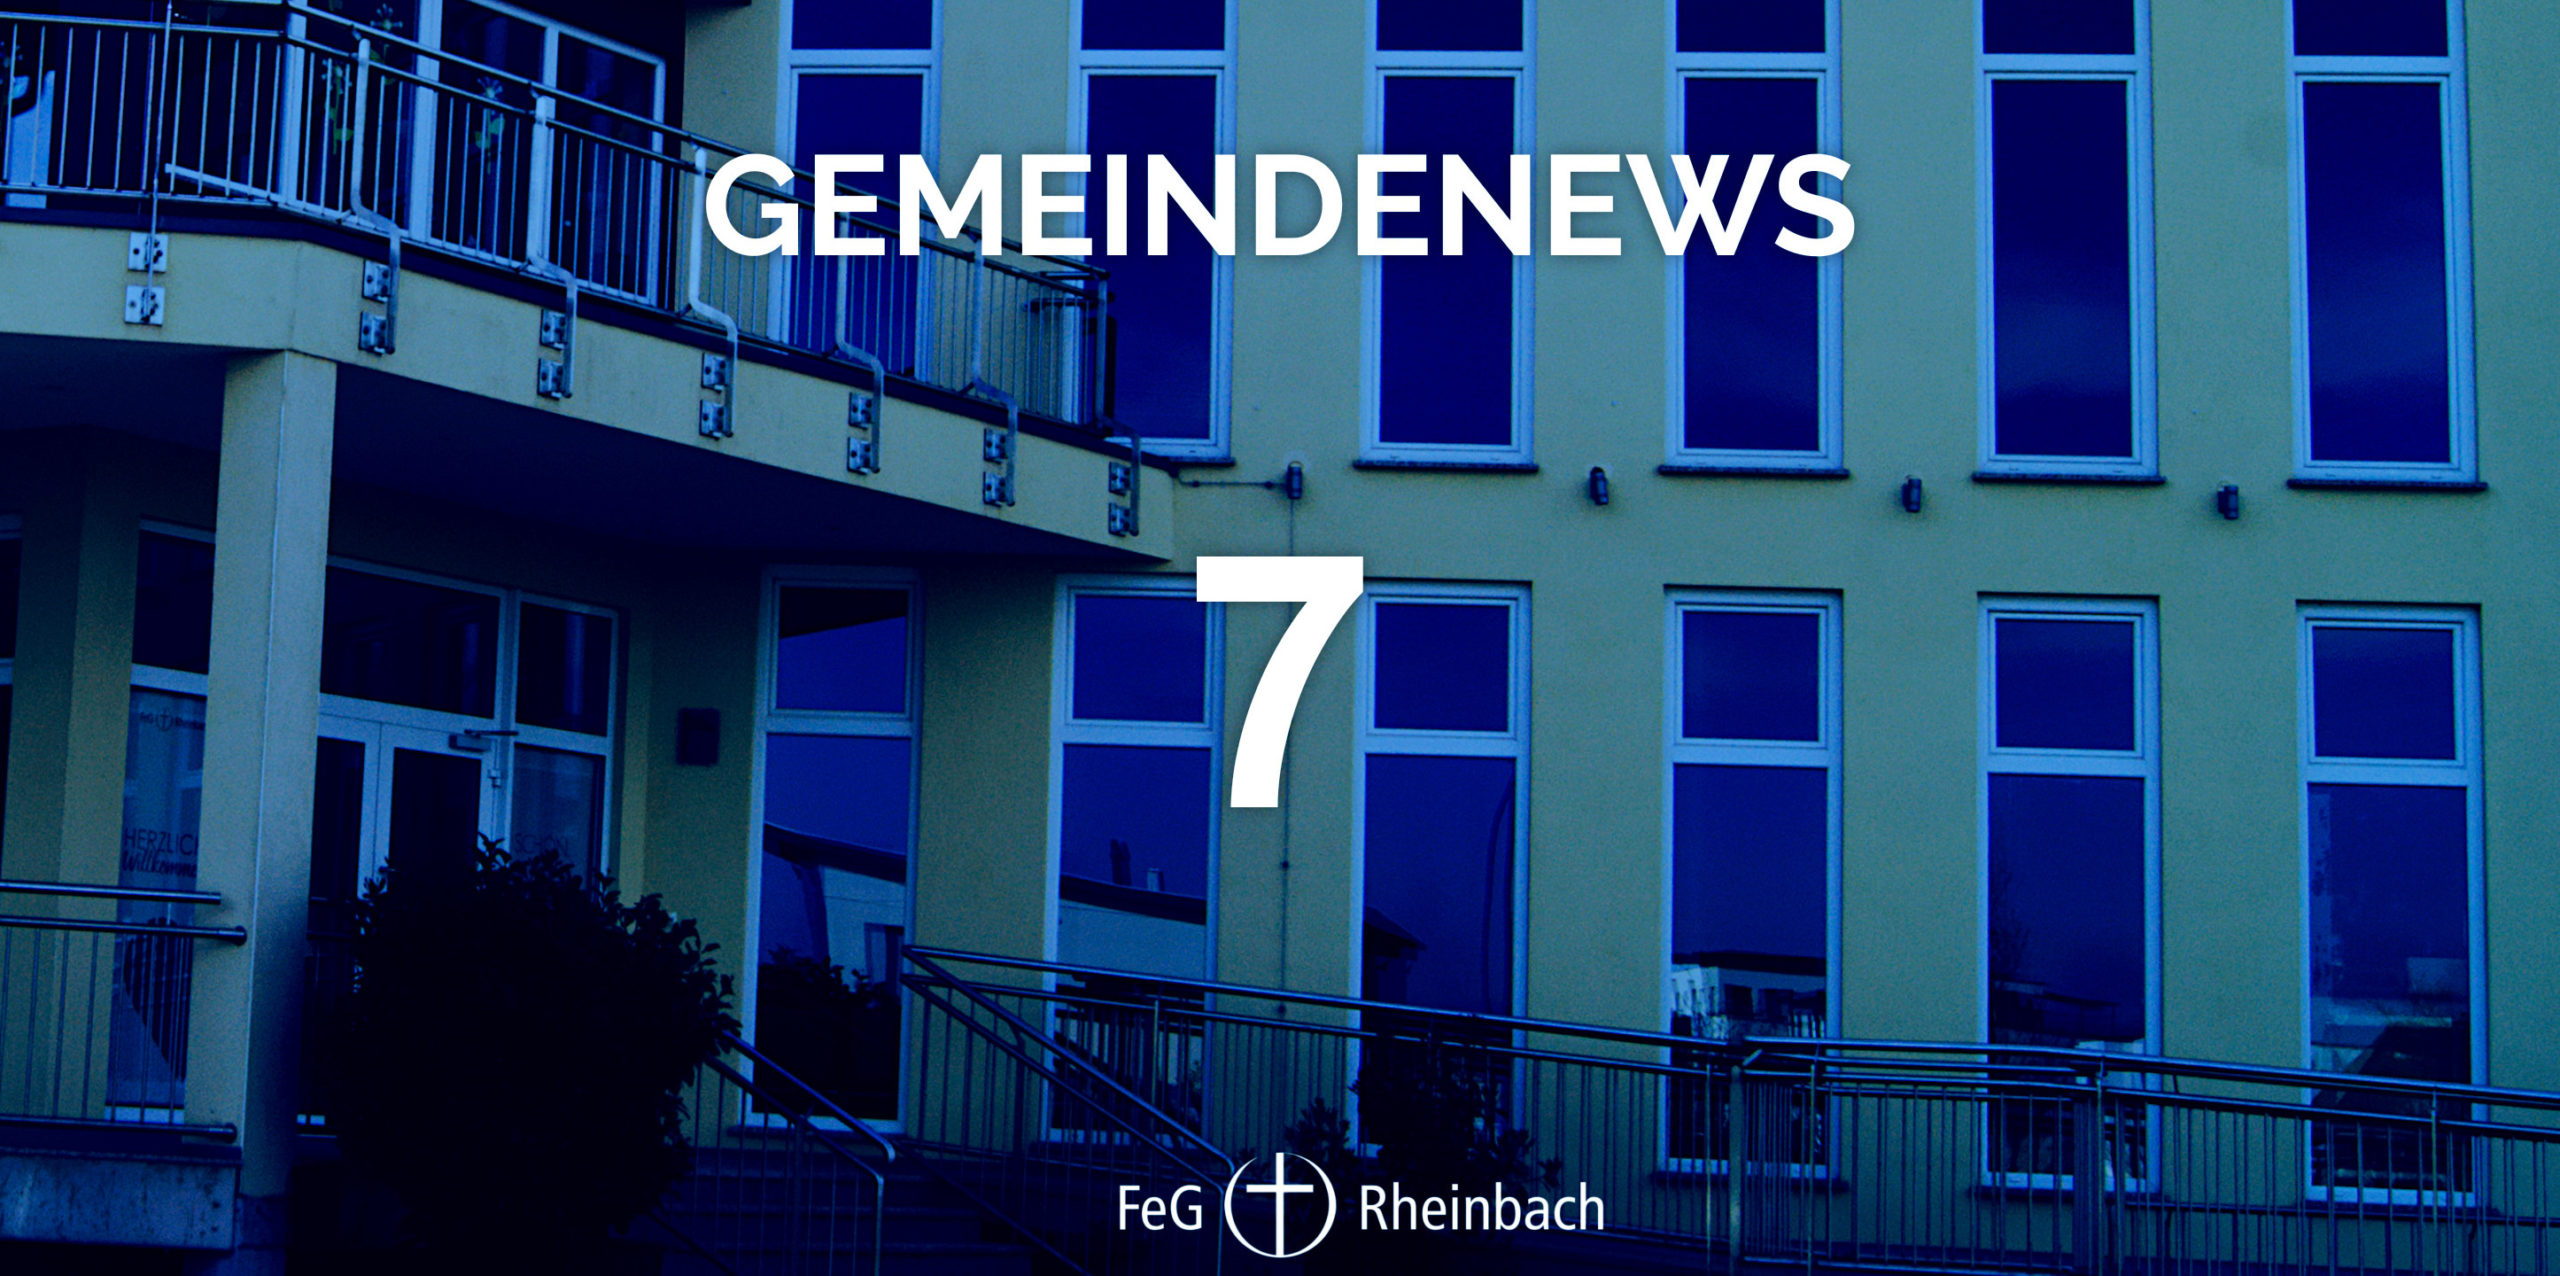 You are currently viewing Gemeindenews 7